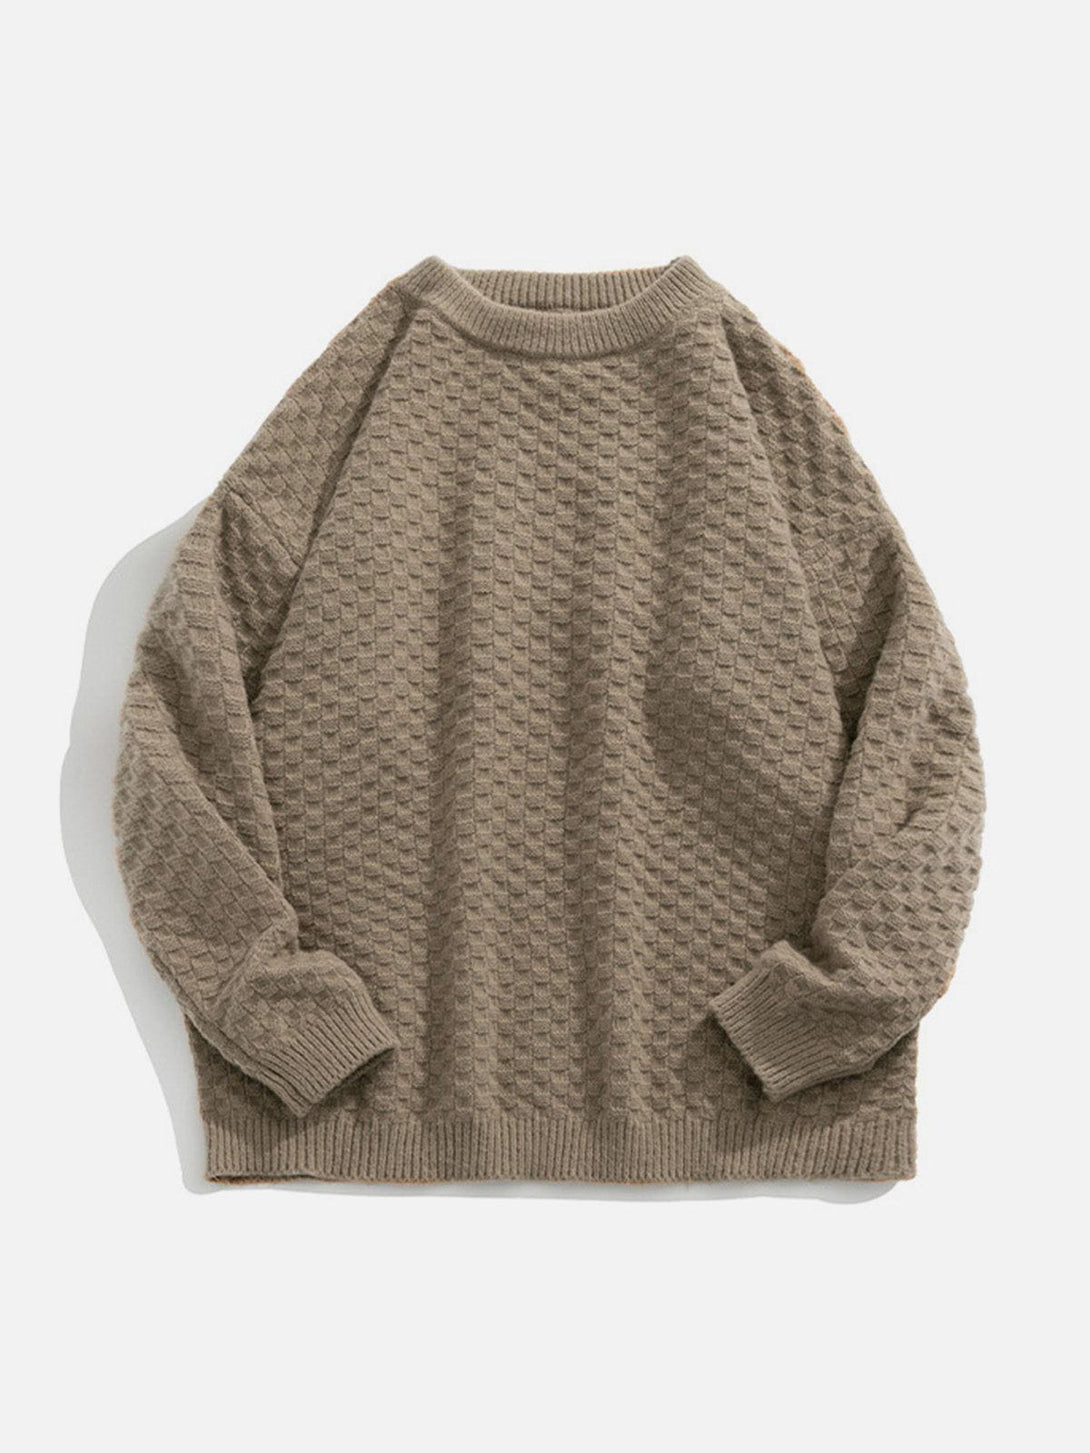 Ellesey - Textured Solid Color Sweater-Streetwear Fashion - ellesey.com